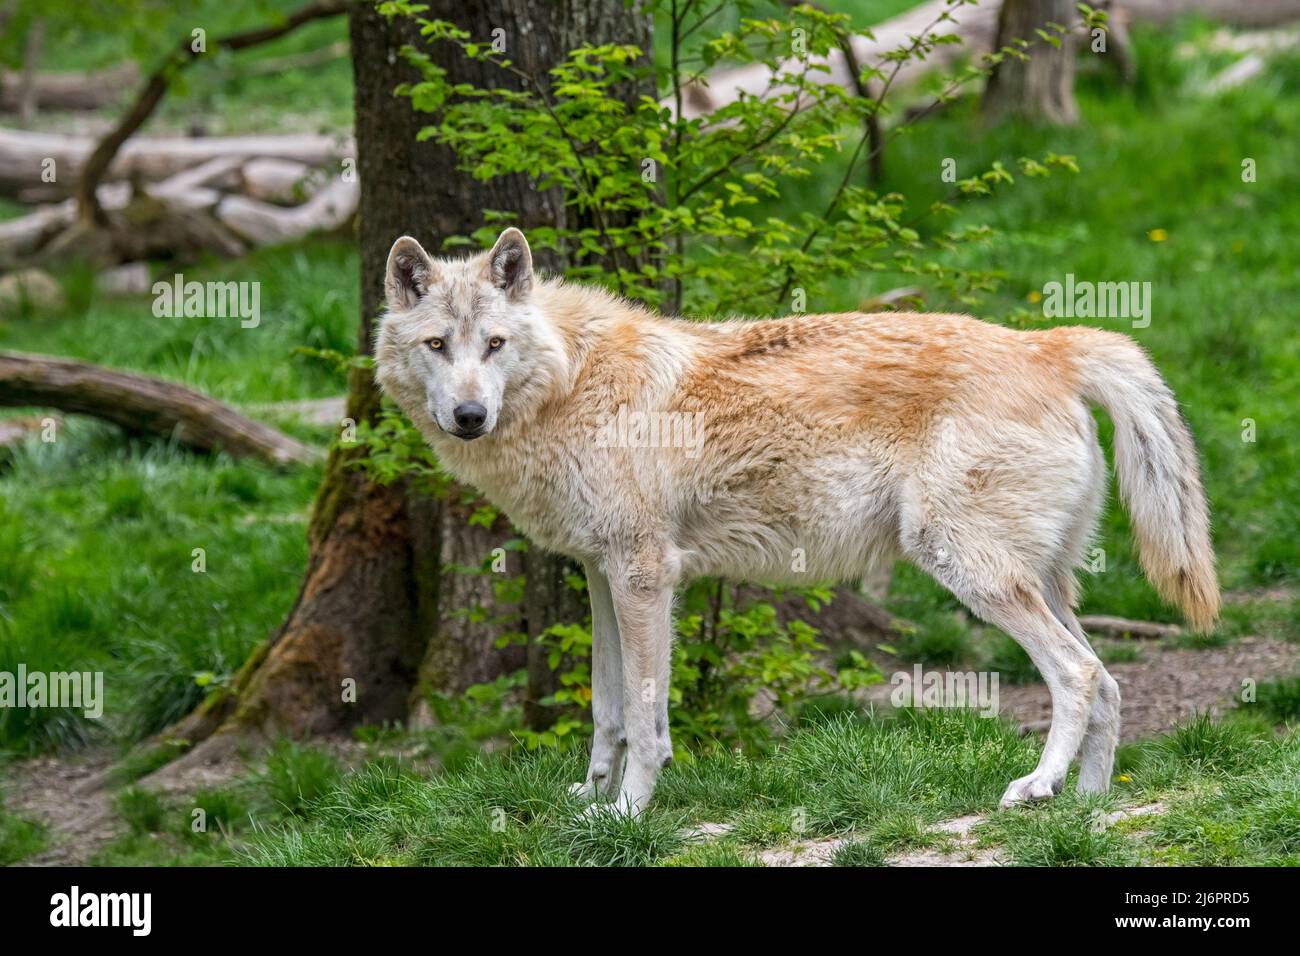 White Northwestern wolf / Mackenzie Valley wolf / Alaskan timber wolf / Canadian timber wolf (Canis lupus occidentalis) in forest Stock Photo